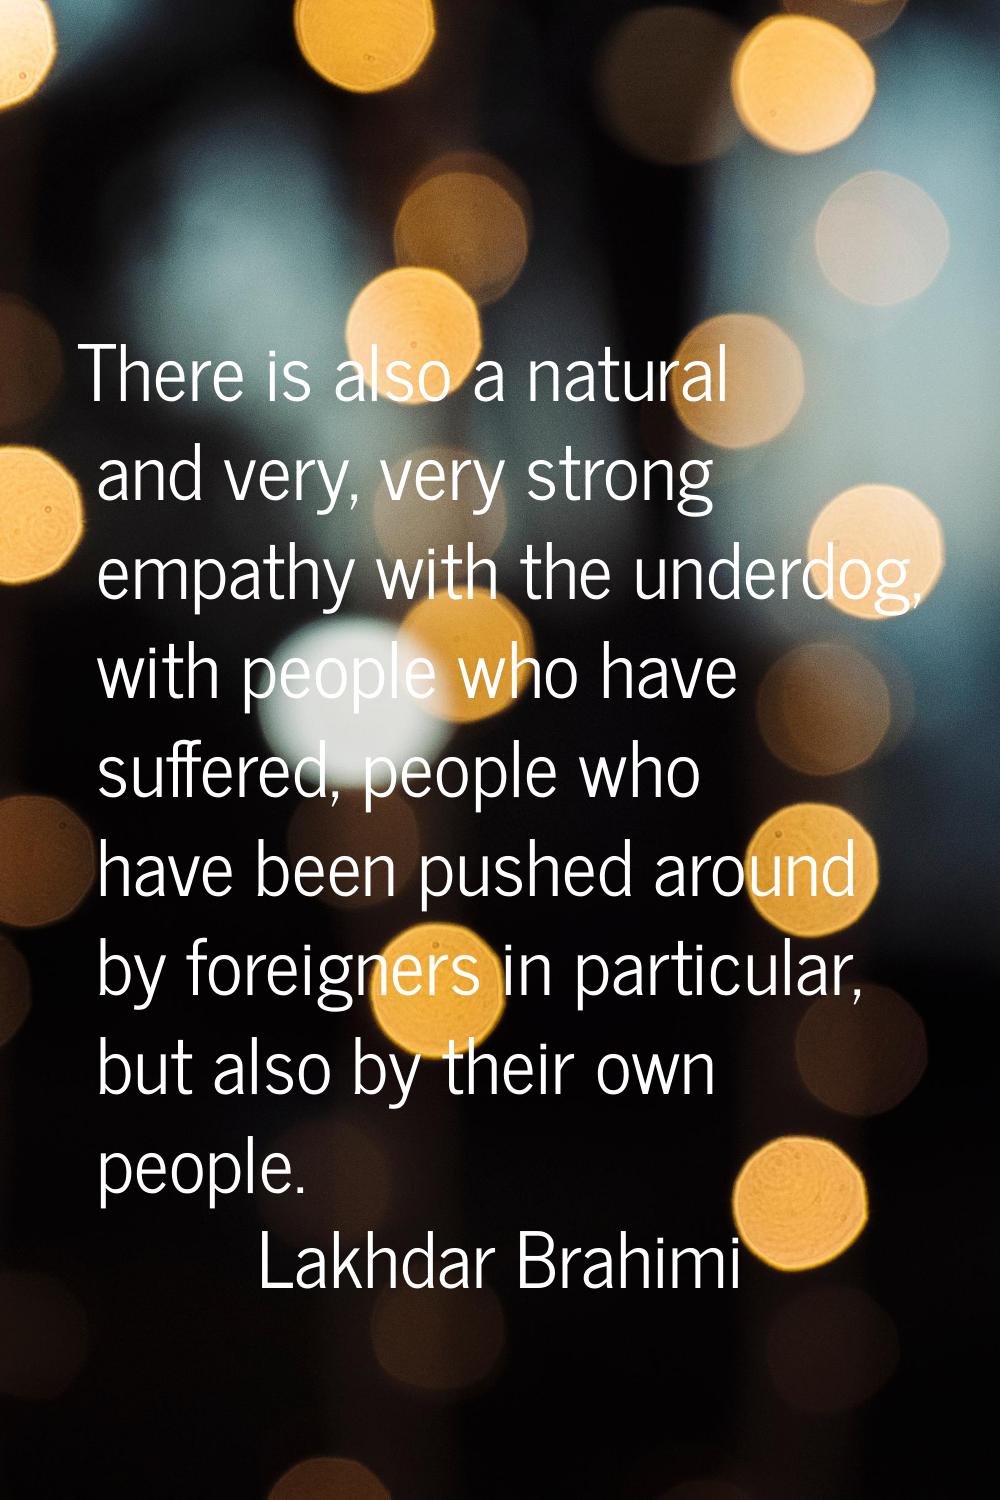 There is also a natural and very, very strong empathy with the underdog, with people who have suffe